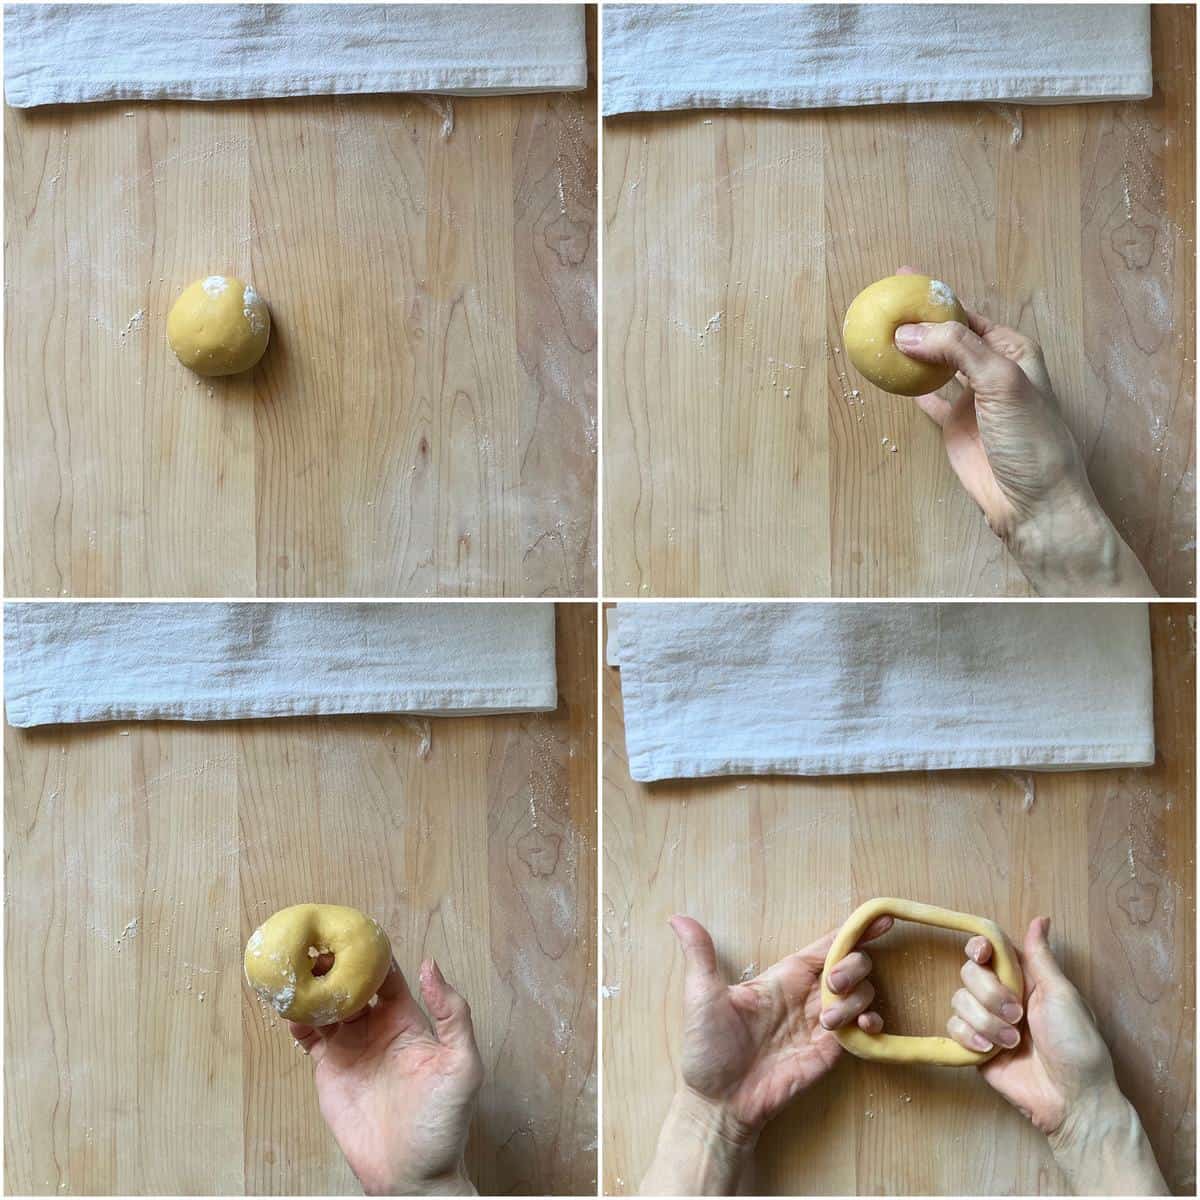 A photo collage of the taralli dough being formed into a ring.